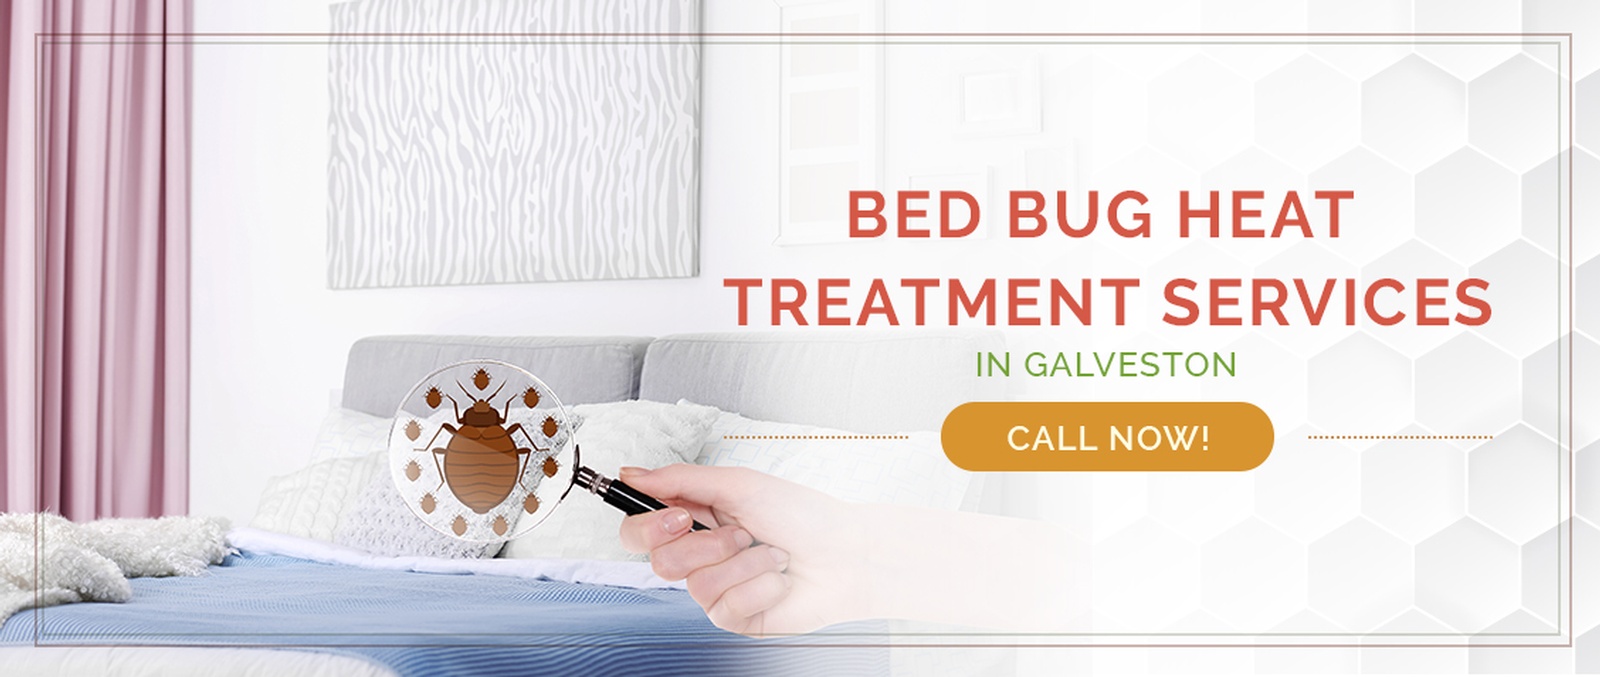 Galveston Bed Bug Treatment / Heater Rental Services by Houston Bed Bug Heaters